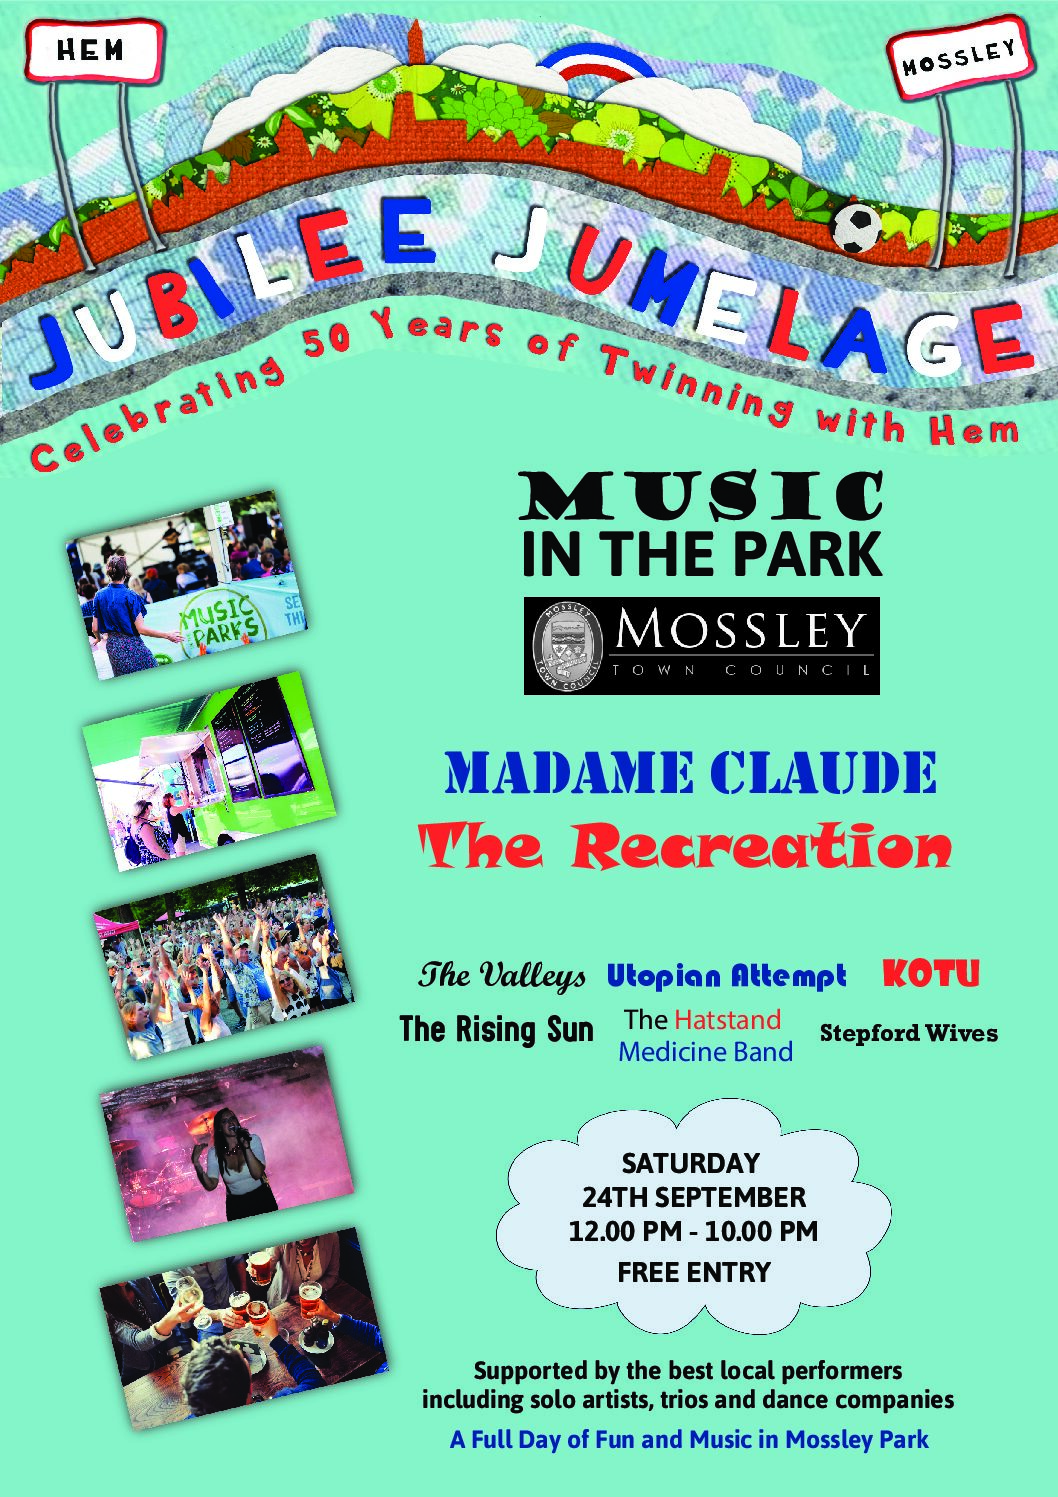 Mossley ‘Music in the Park’ Event – Saturday 24 September 2022!